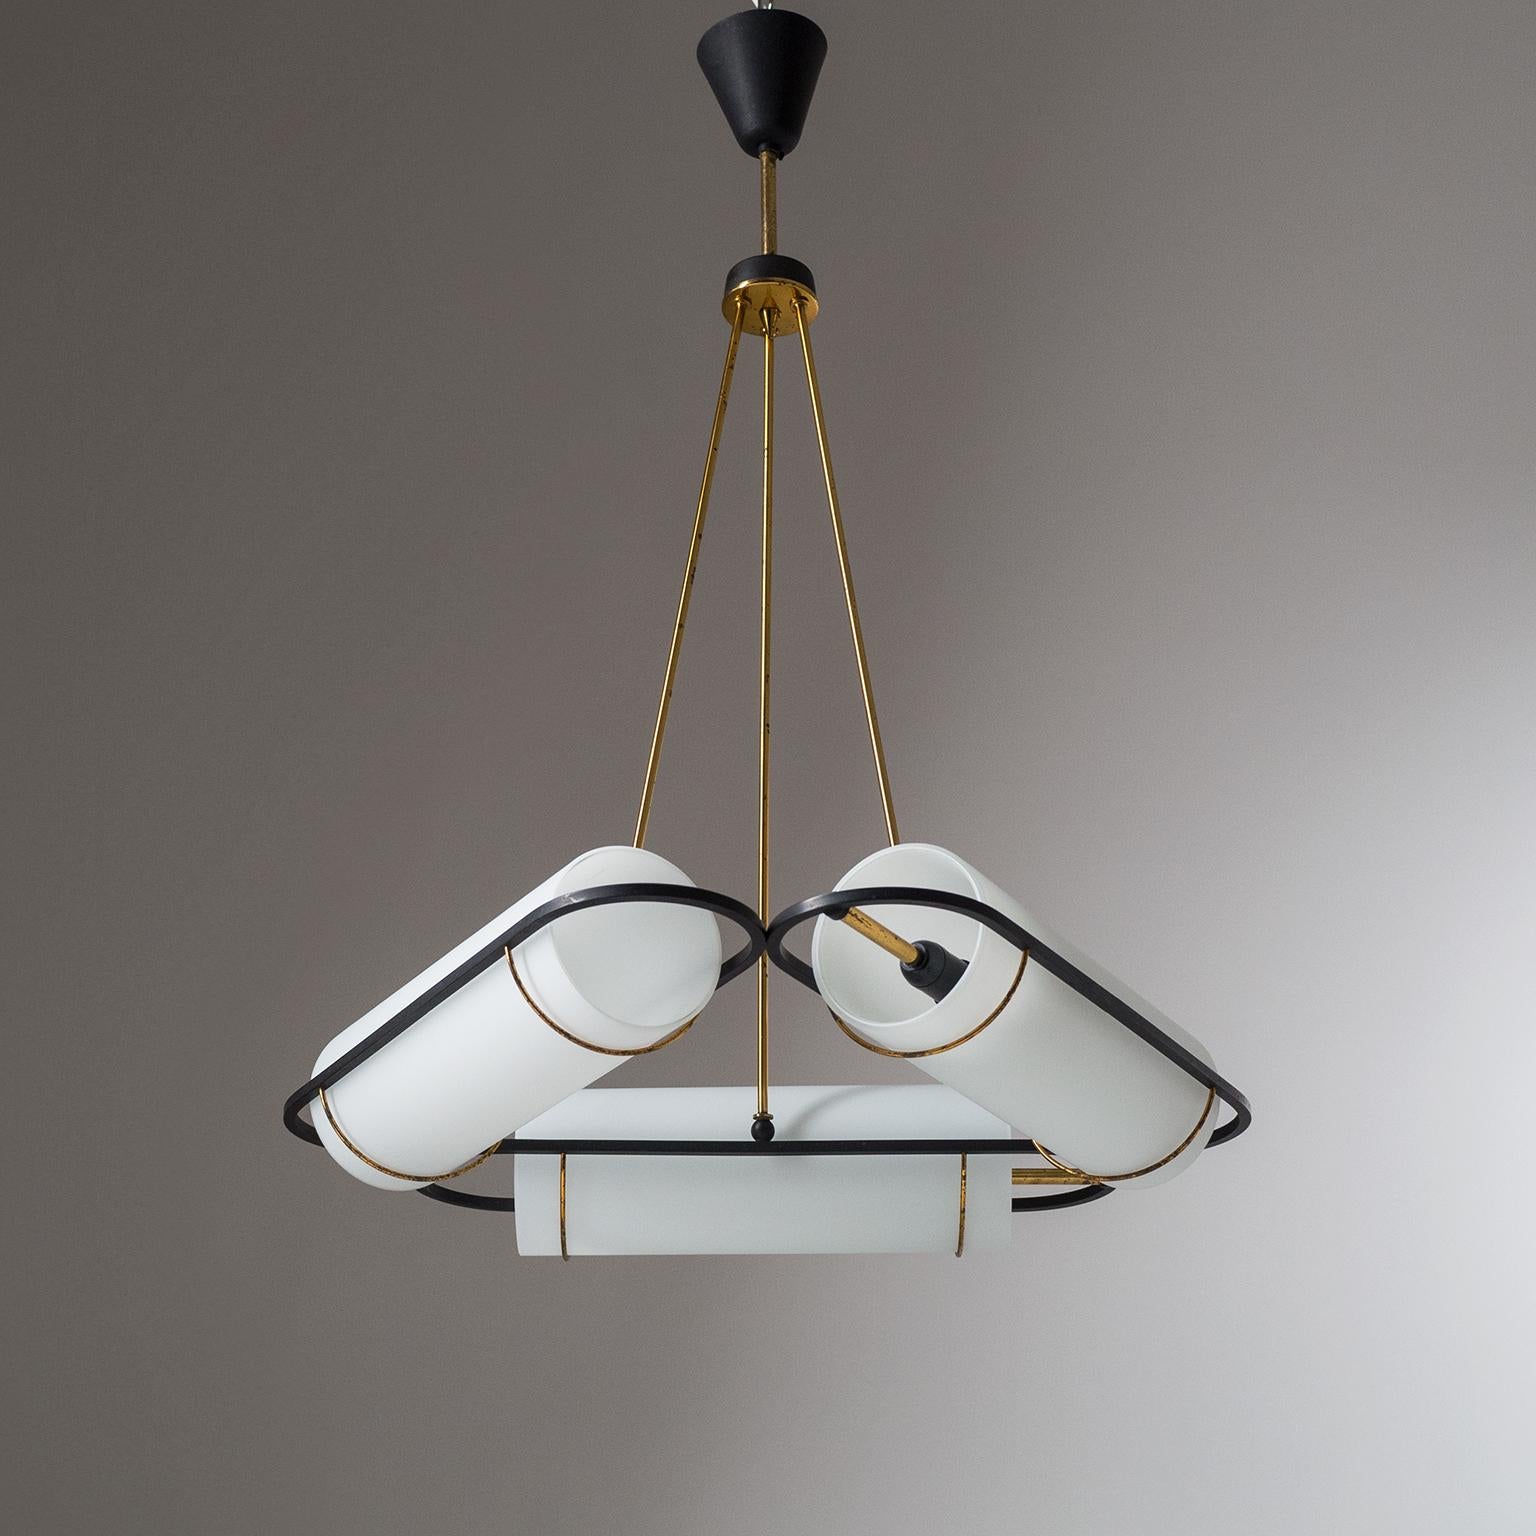 Very rare Italian modernist chandelier attributed to Stilnovo from the 1950s. Three arms arranged in triangular form, each with a large acid-satinated glass diffuser and an original E14 socket with new wiring. Very good original condition with